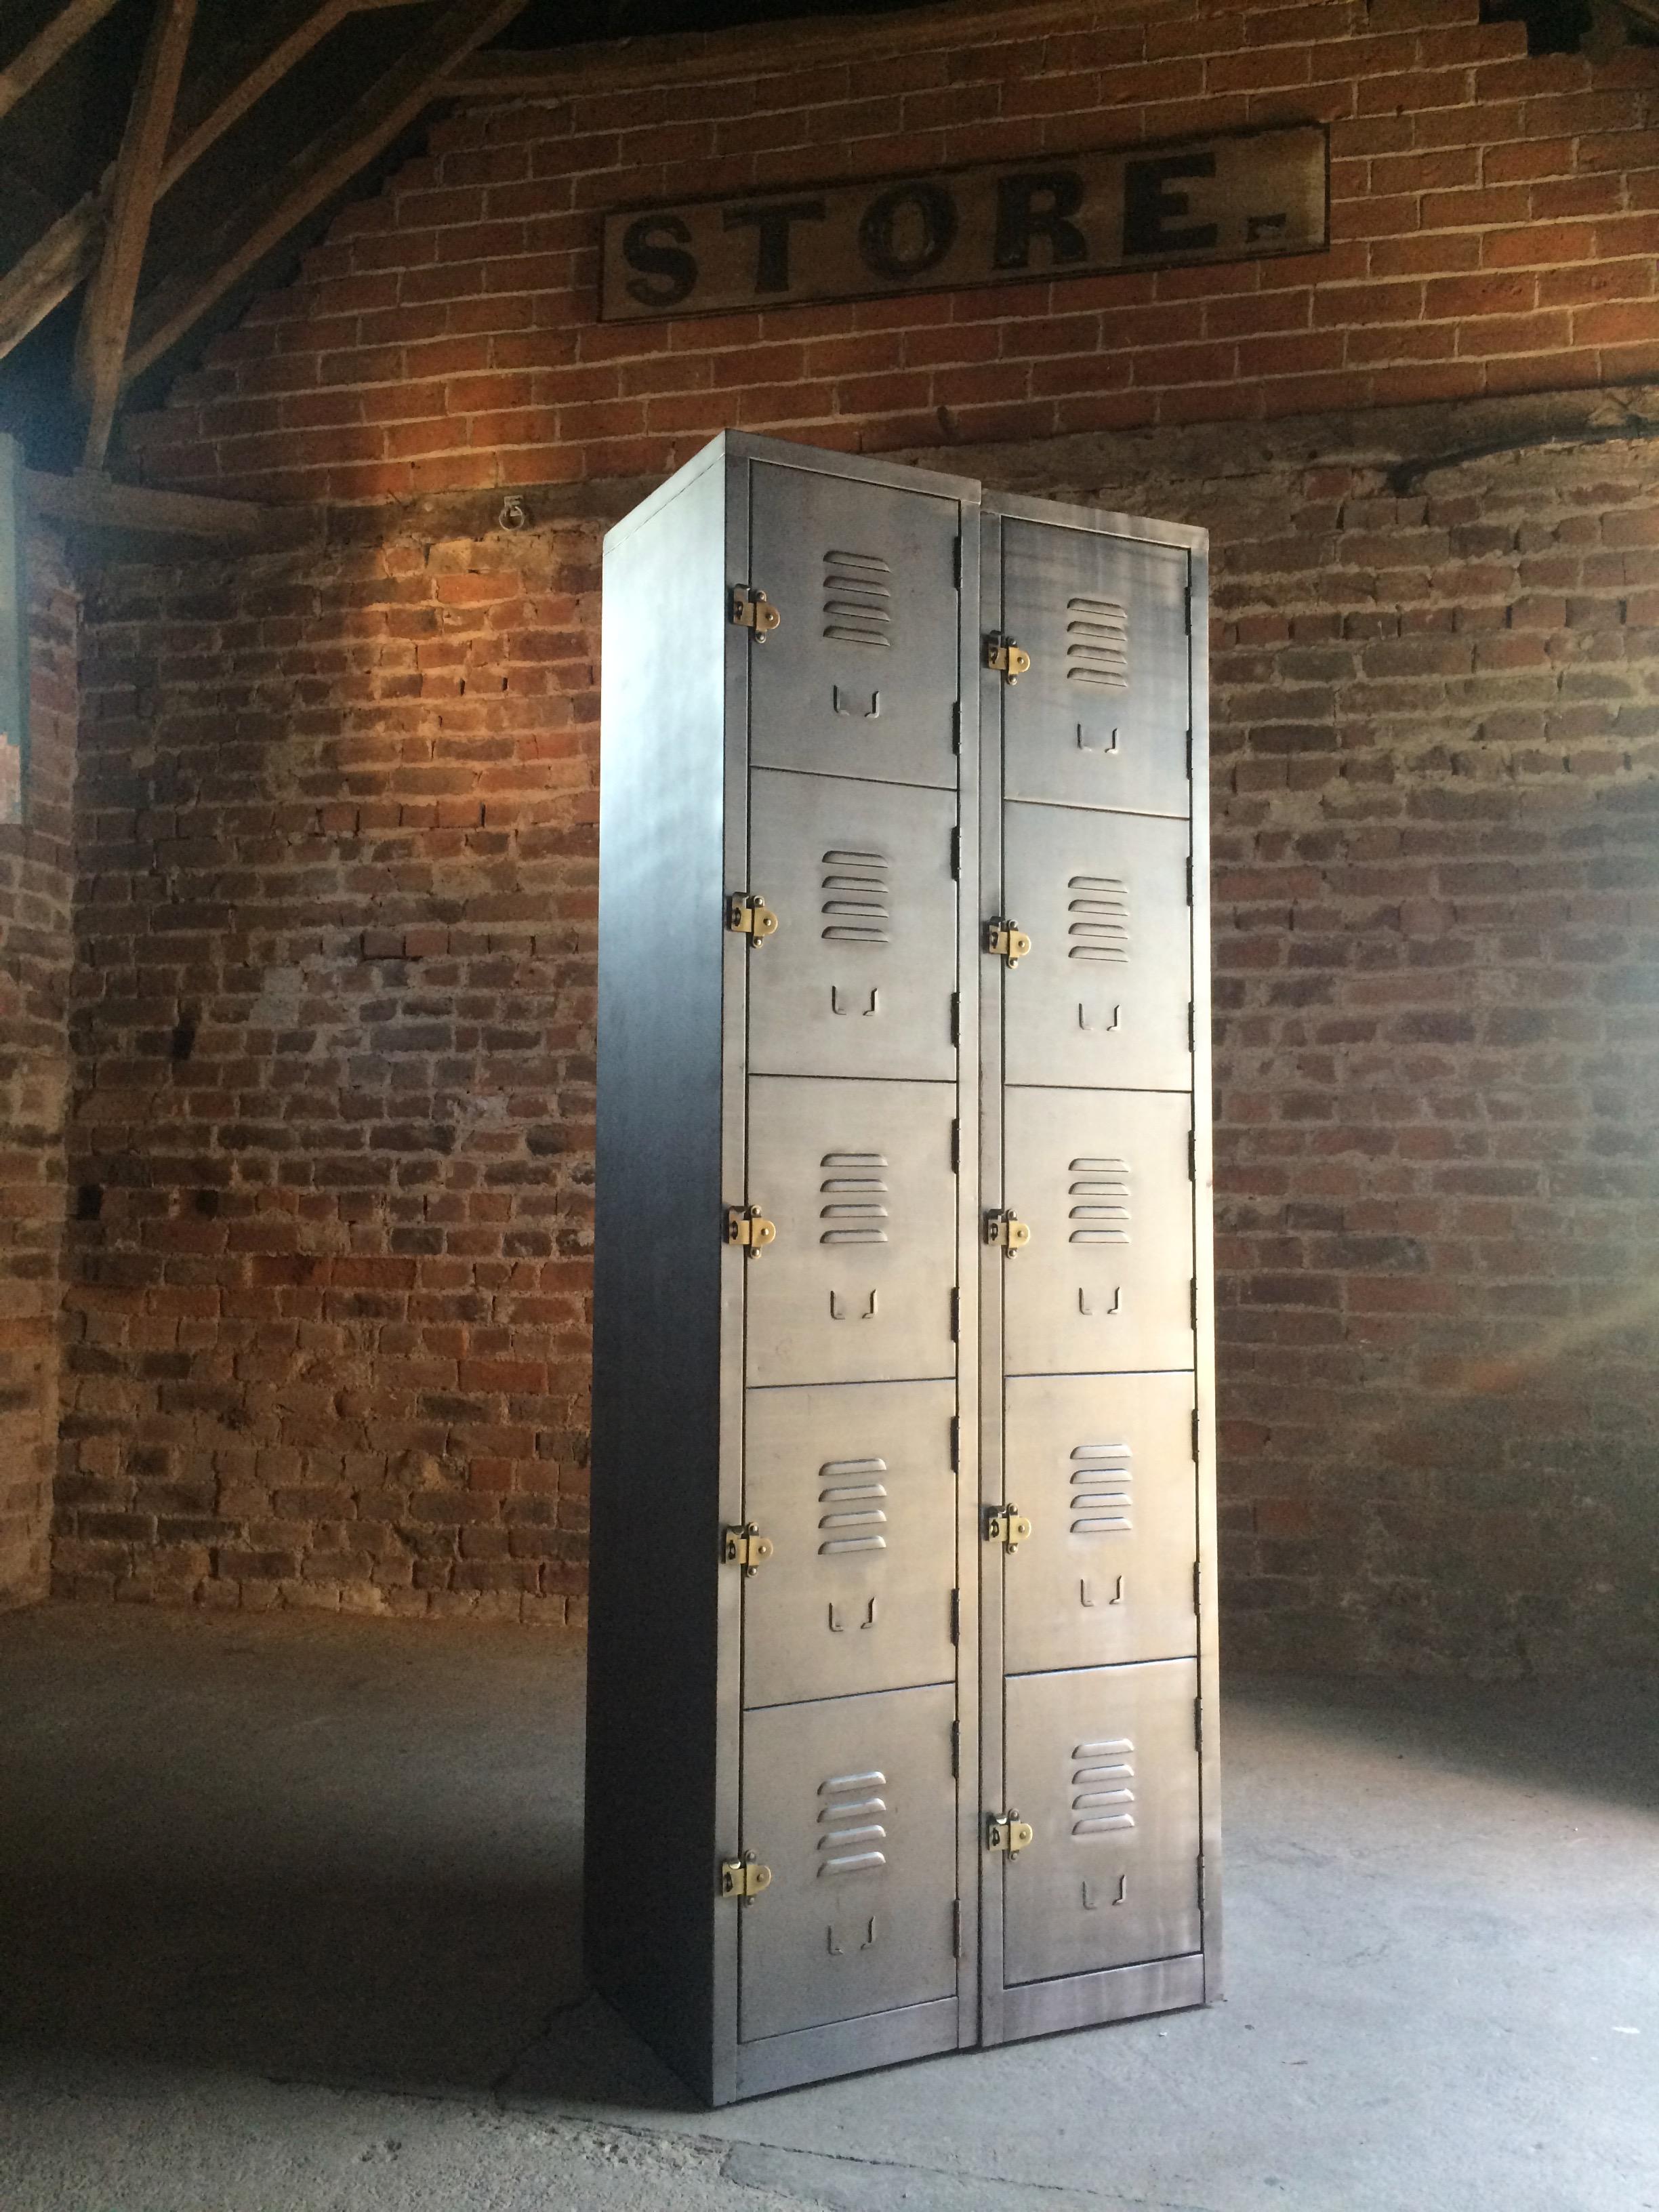 Polished Stunning Industrial Metal Lockers Loft Style Brushed Steel Cabinets 20 Cabinets